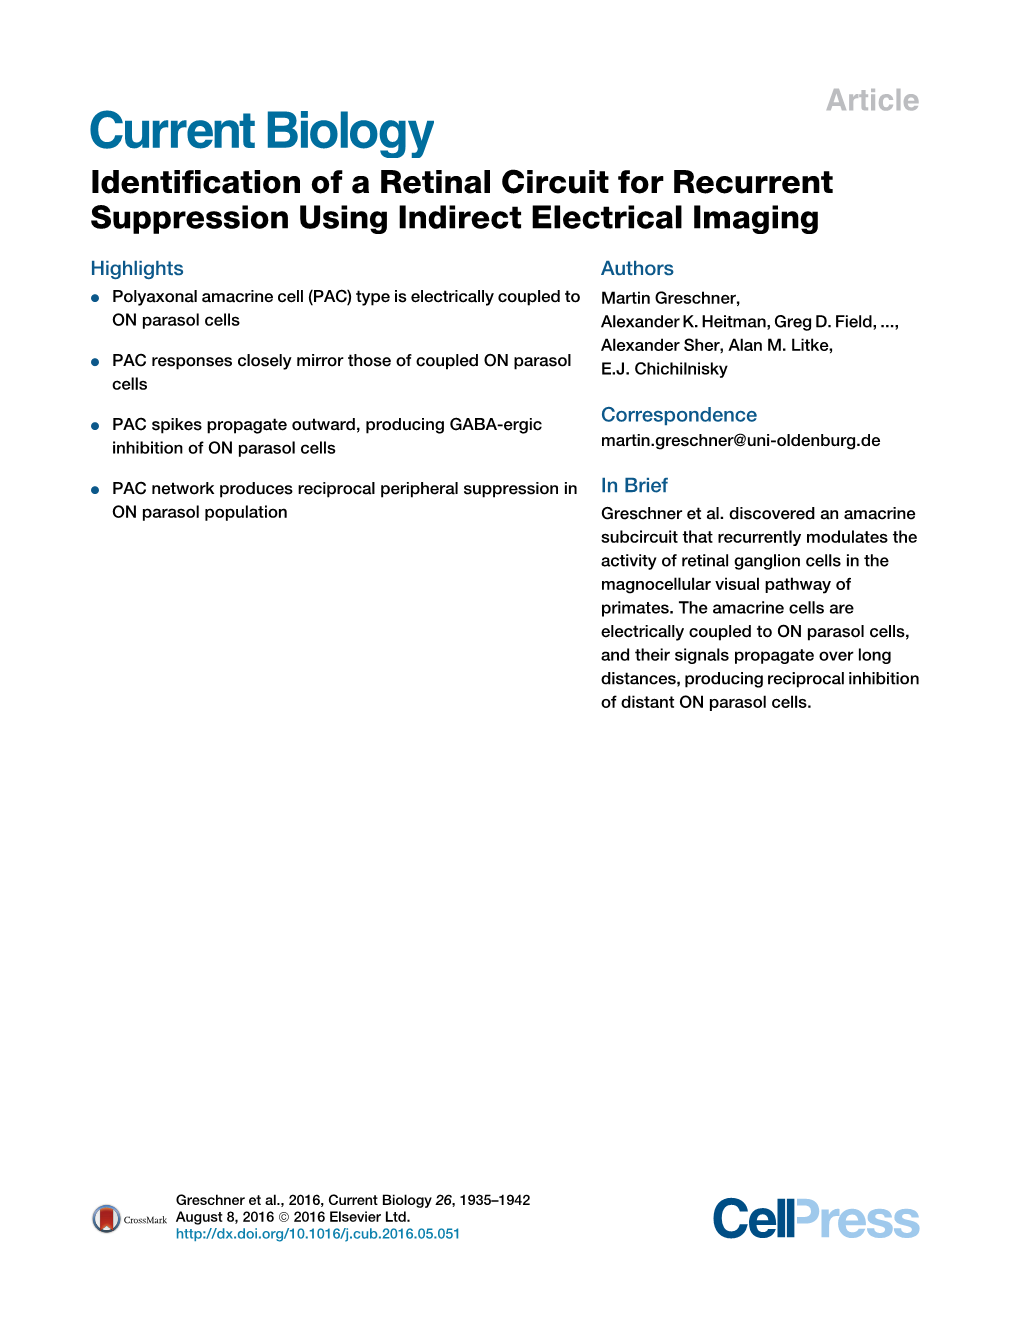 Identification of a Retinal Circuit for Recurrent Suppression Using